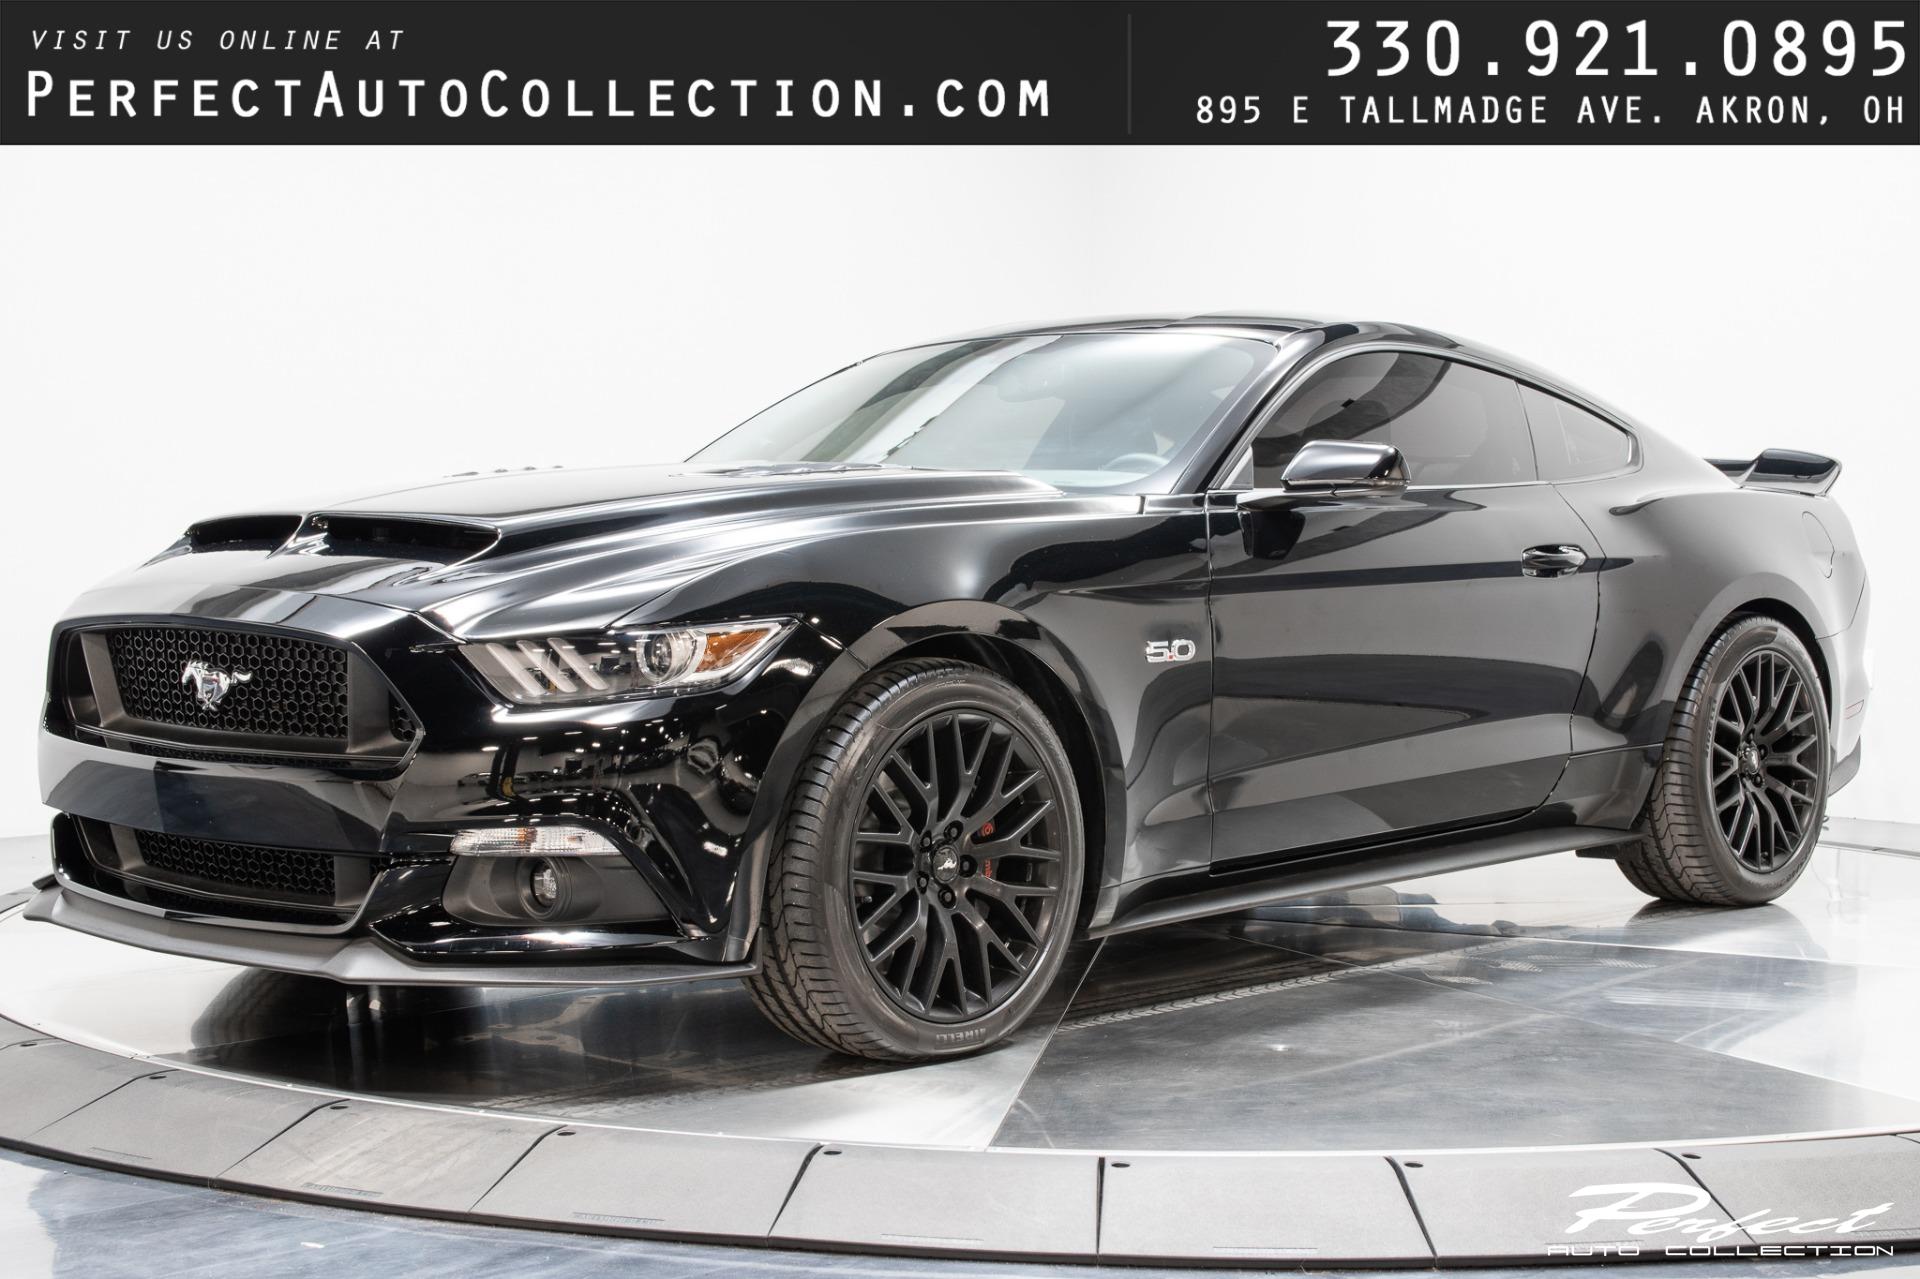 Used 17 Ford Mustang Gt Premium For Sale Sold Perfect Auto Collection Stock